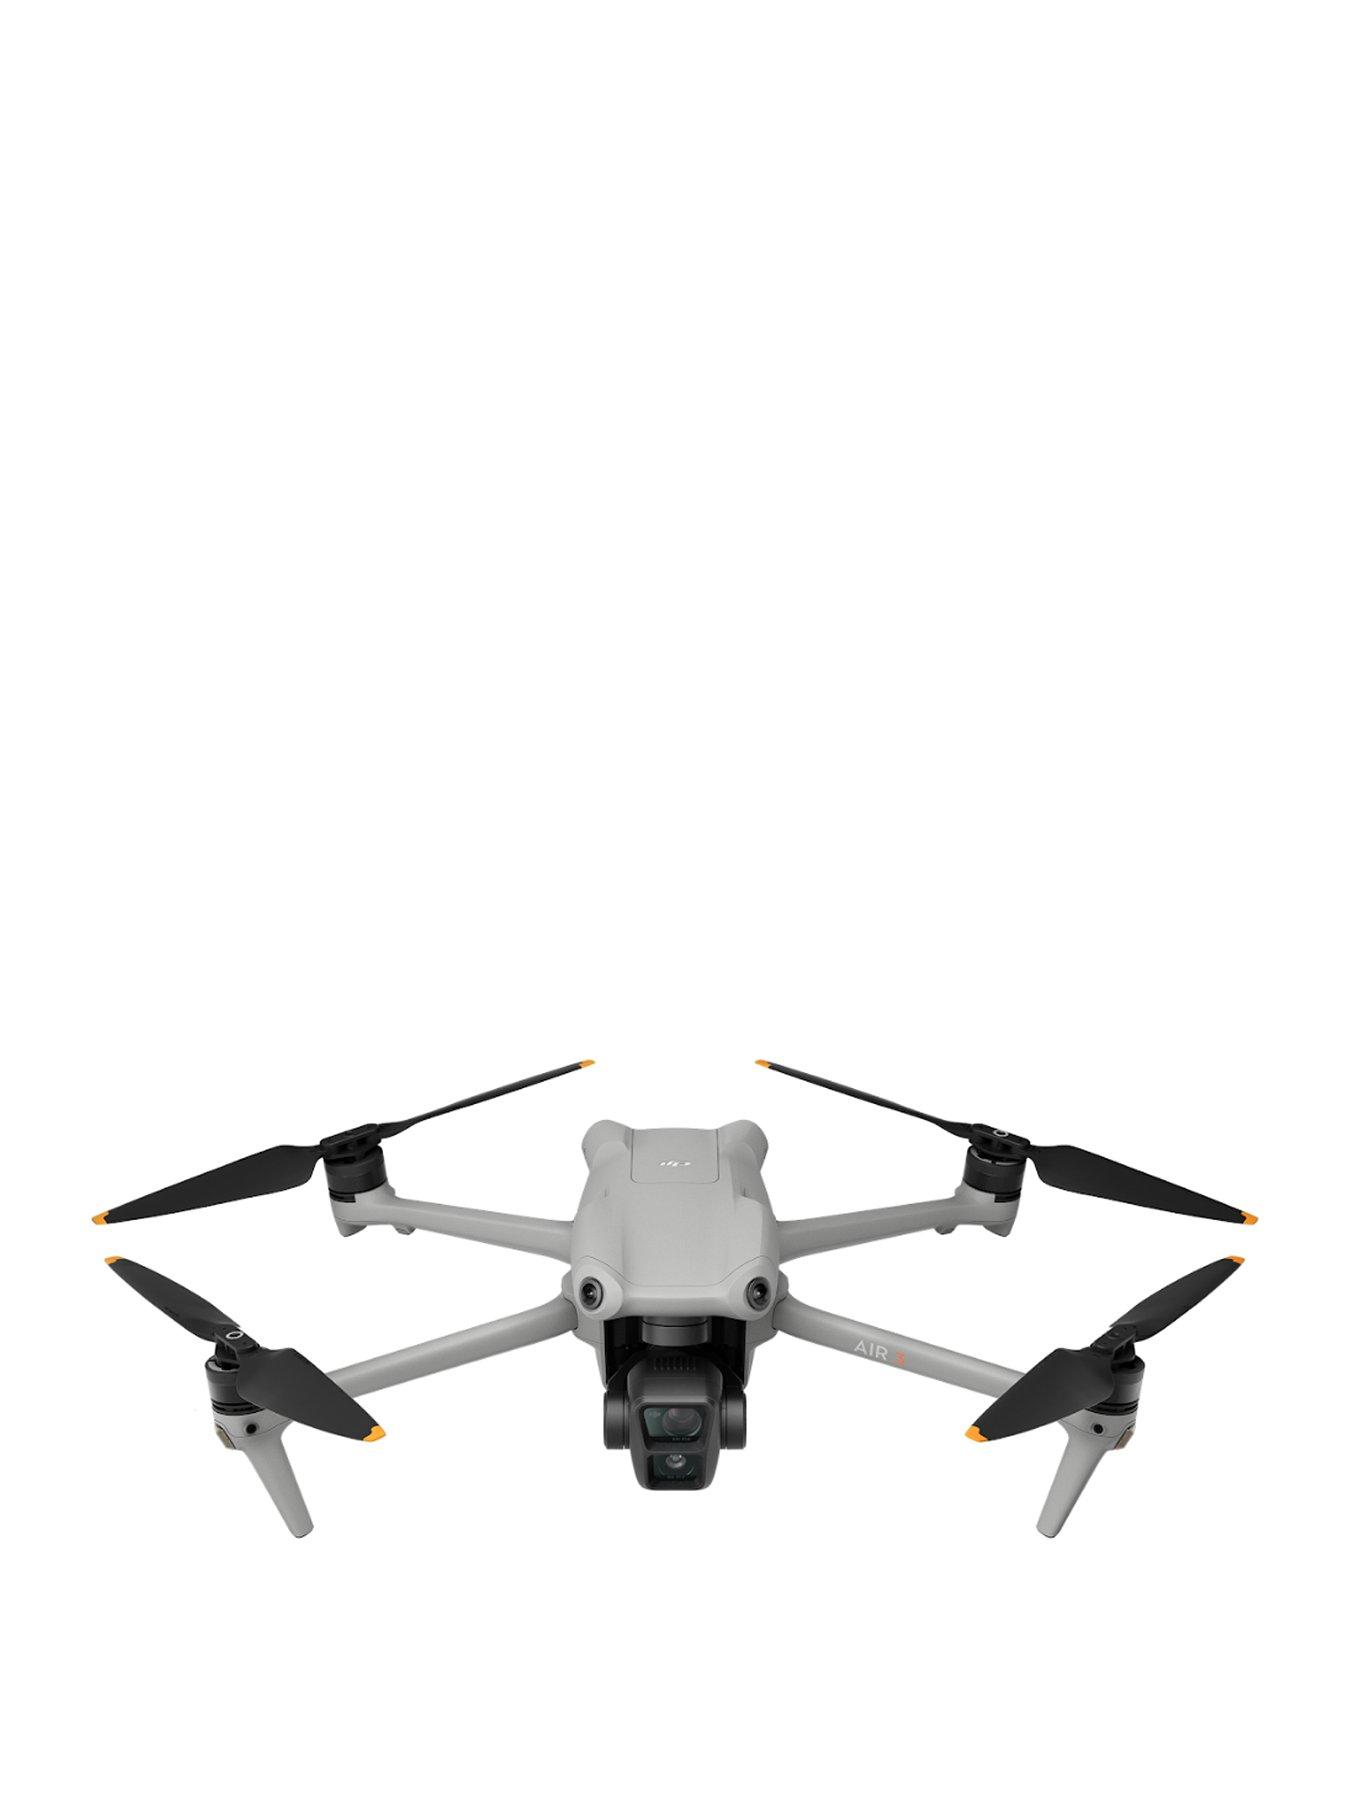 DJI Air 2S Review, Specs, Price and Unboxing: 5.4K 1-inch sensor